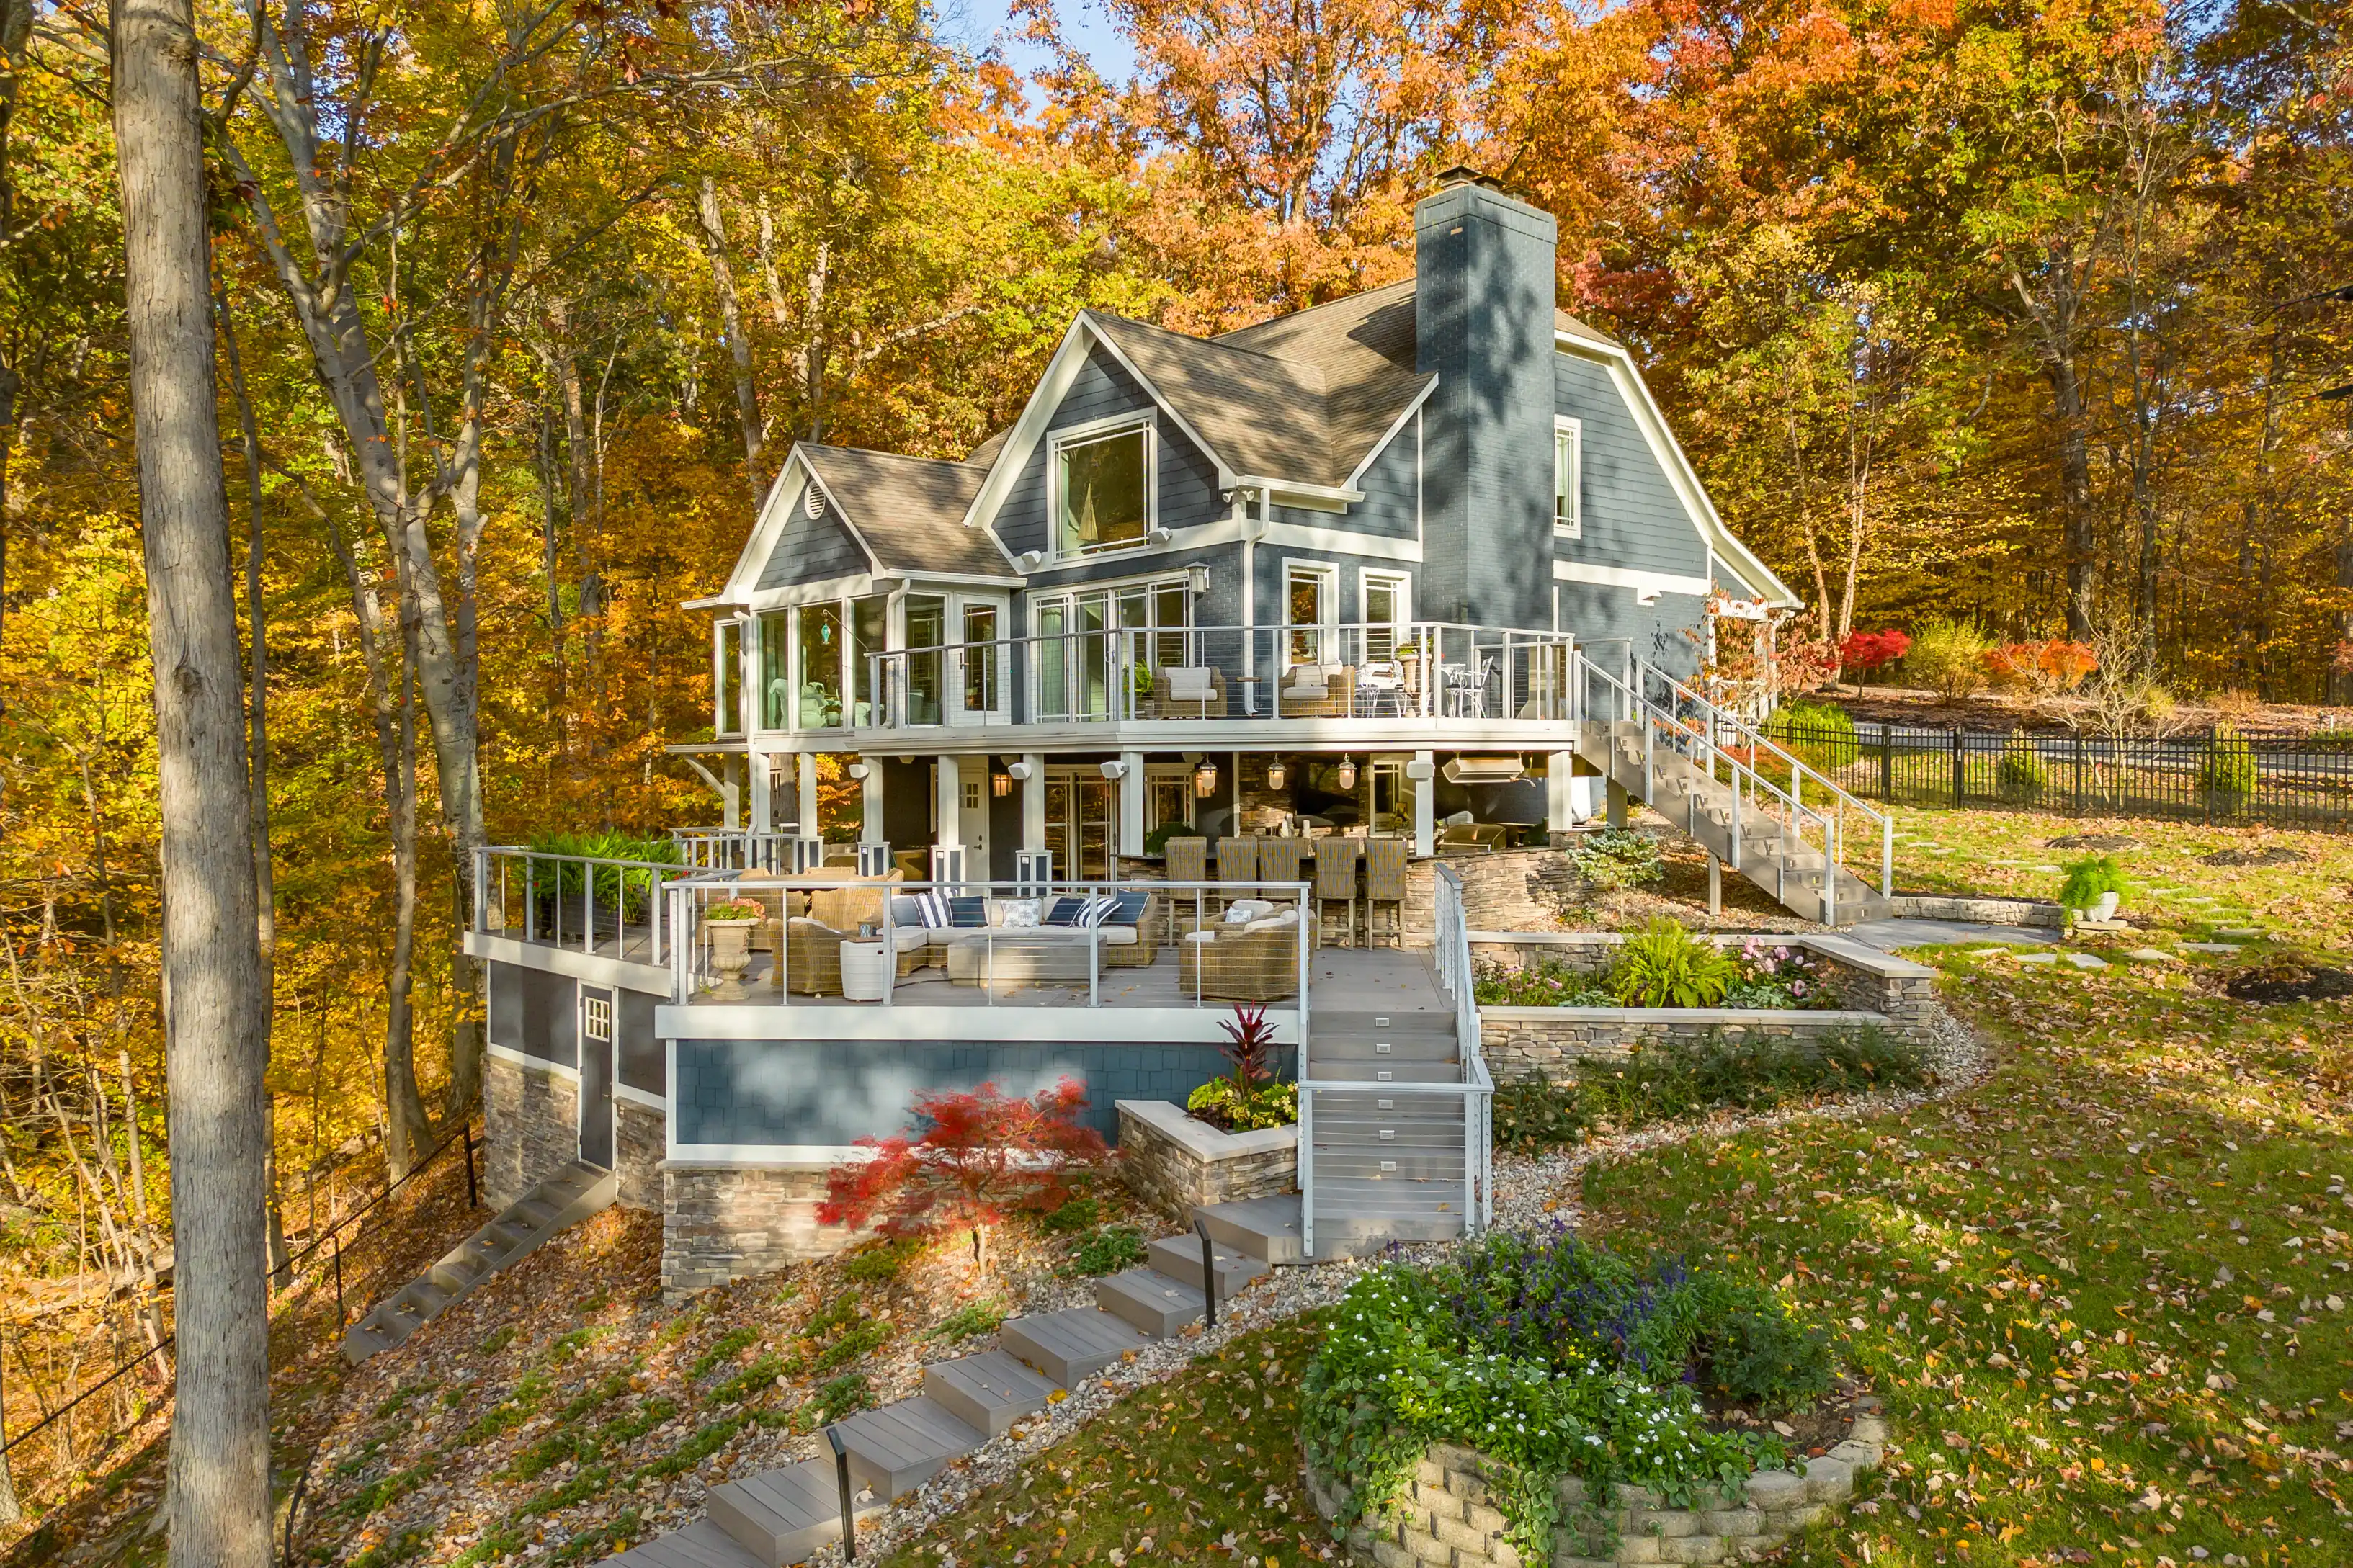 A large two-story house with multiple decks surrounded by autumn trees.